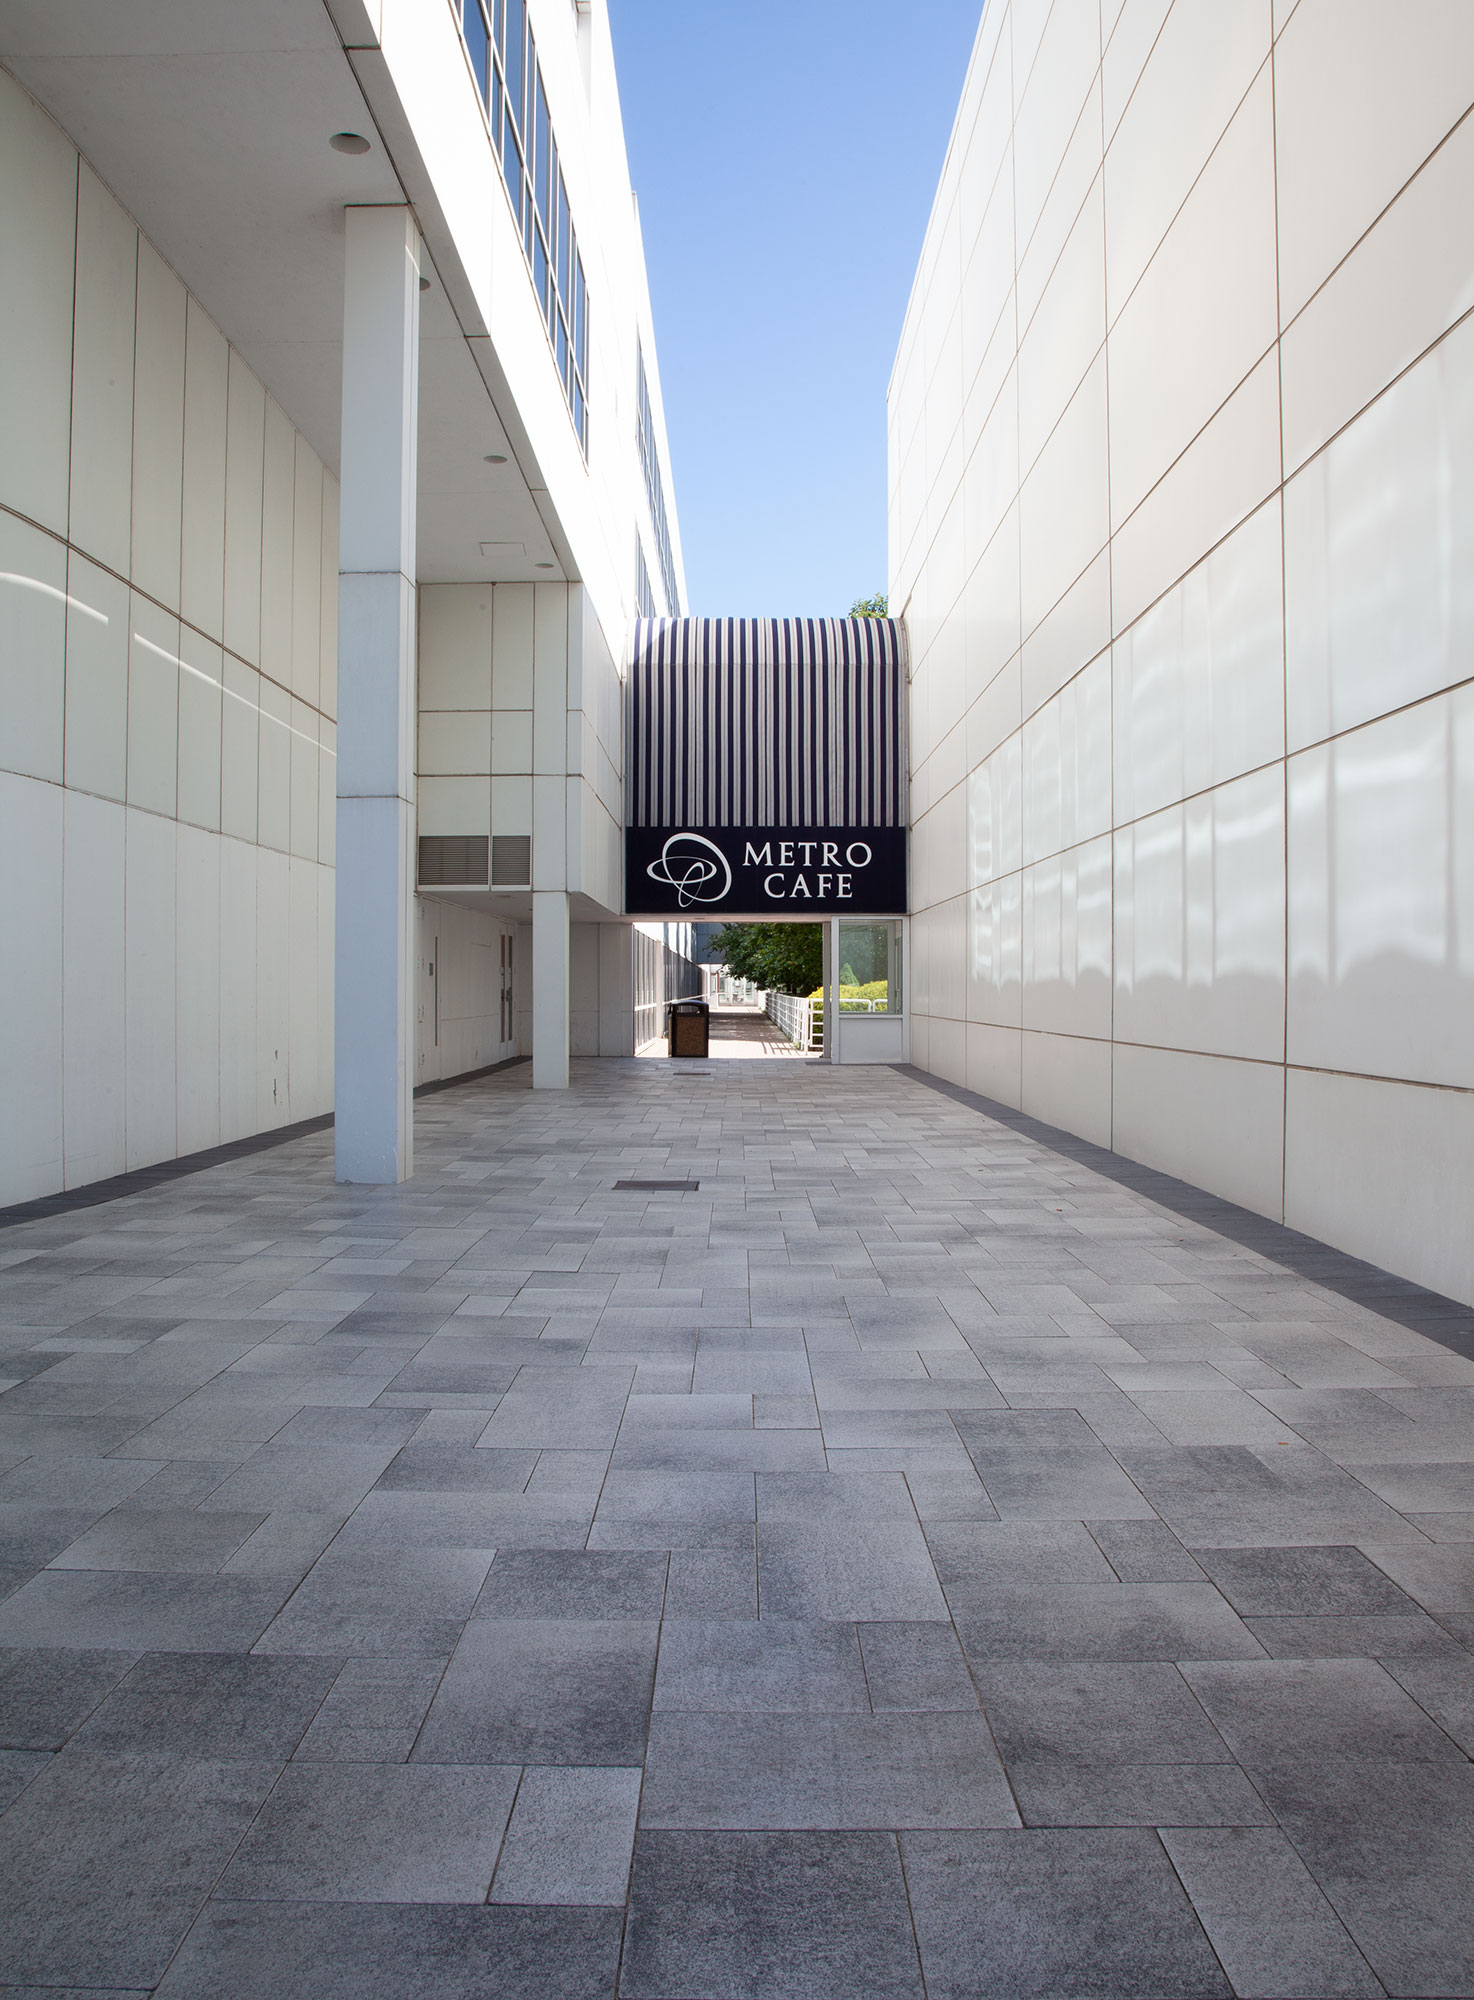 Between two white buildings, a path of grey Umbriano pavers in varying sizes and shades leads to the patio entrance of the Metro Café.